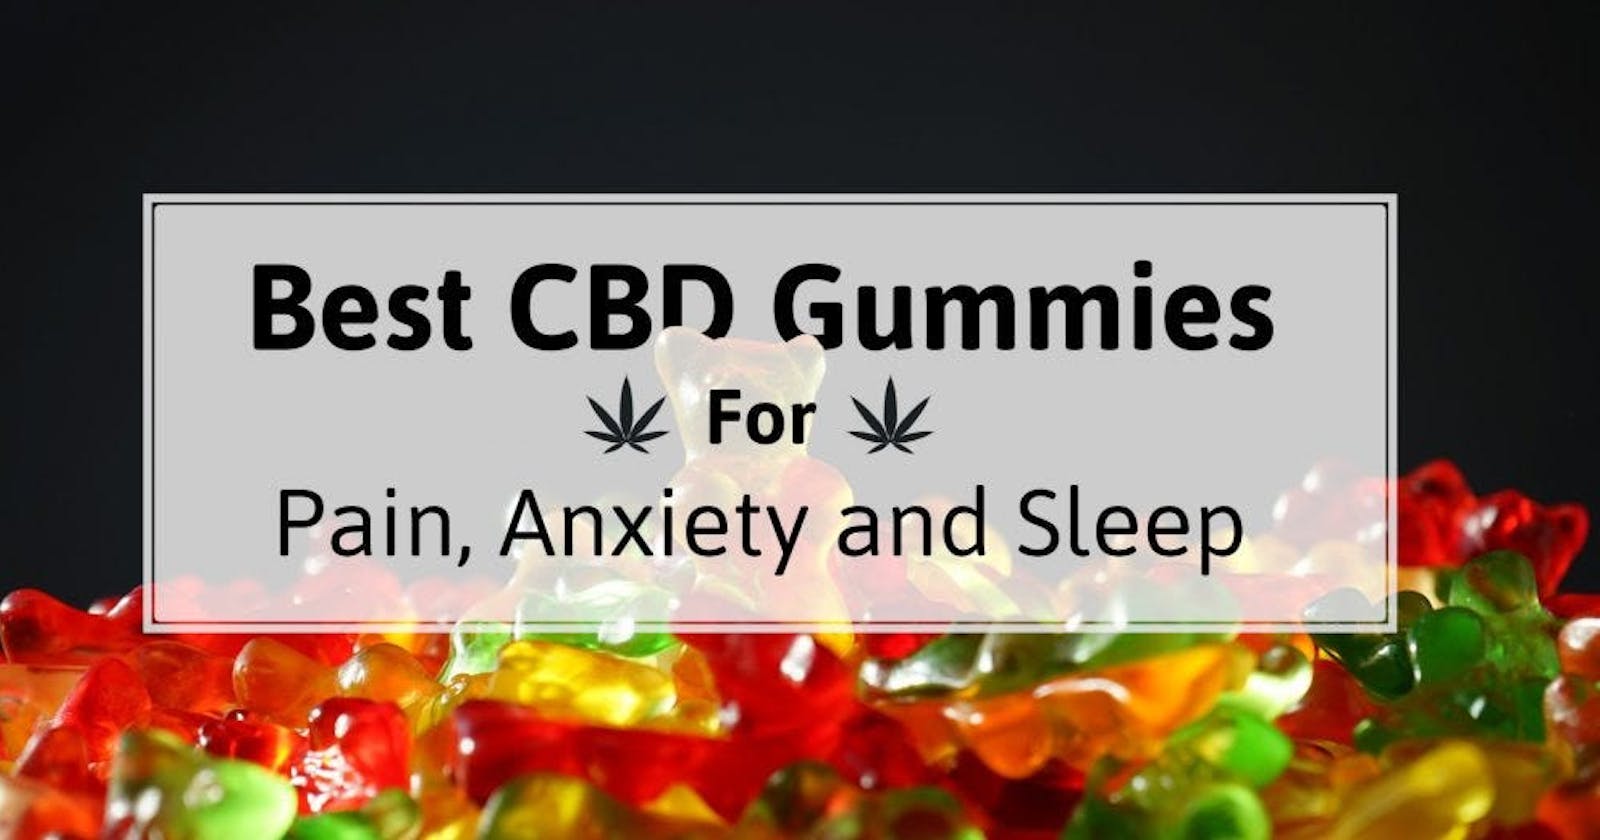 Bioblend CBD Gummies Reviews- Read Daily Dose Benefits, Safe Effective Pain Relief & Shocking Results?